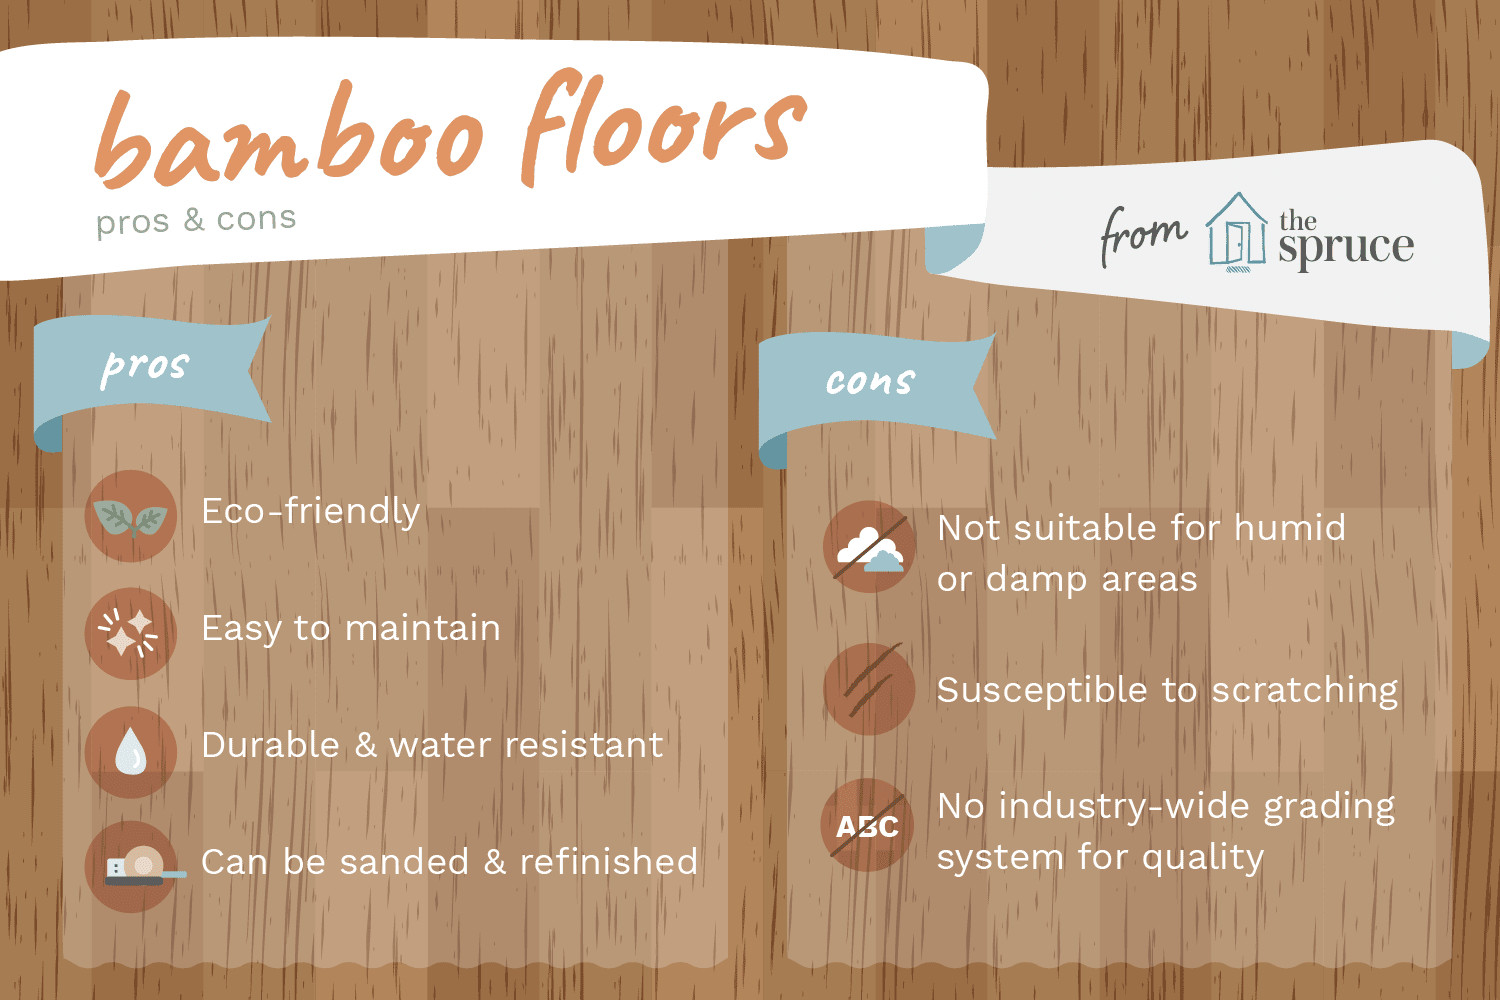 buffing hardwood floors cost of the advantages and disadvantages of bamboo flooring with regard to benefits and drawbacks of bamboo floors 1314694 v3 5b102fccff1b780036c0a4fa